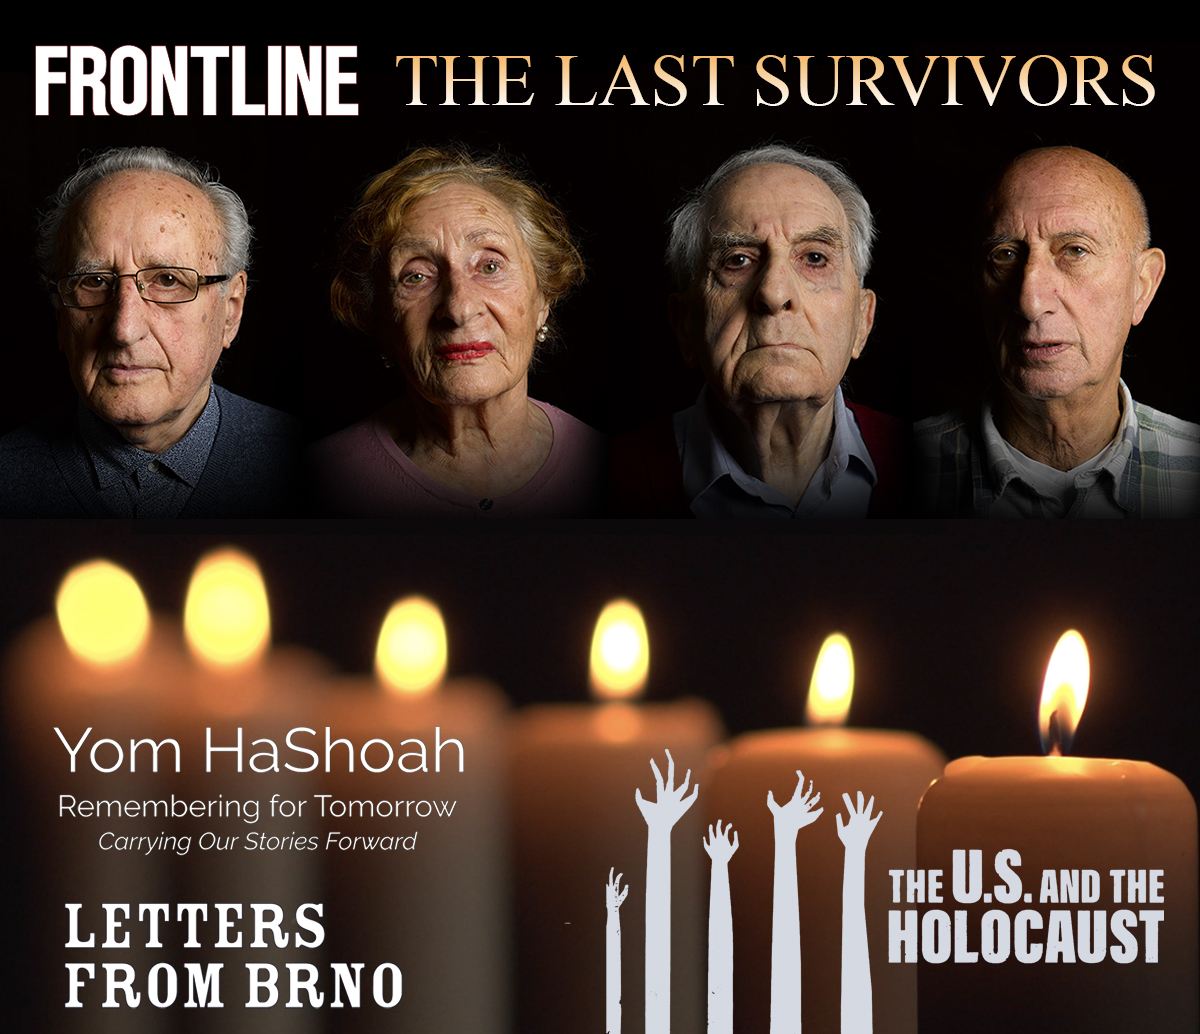 See tragedy & resilience during the terrible events of WWII on PBS The Last Survivors to.pbs.org/3Uxi71L Letters from BRNO to.pbs.org/3QA4qhj Yom HaShoah to.pbs.org/3Uxi6Lf & The U.S. and The Holocaust on Passport to.pbs.org/3PWM1YD #RememberForTomorrow